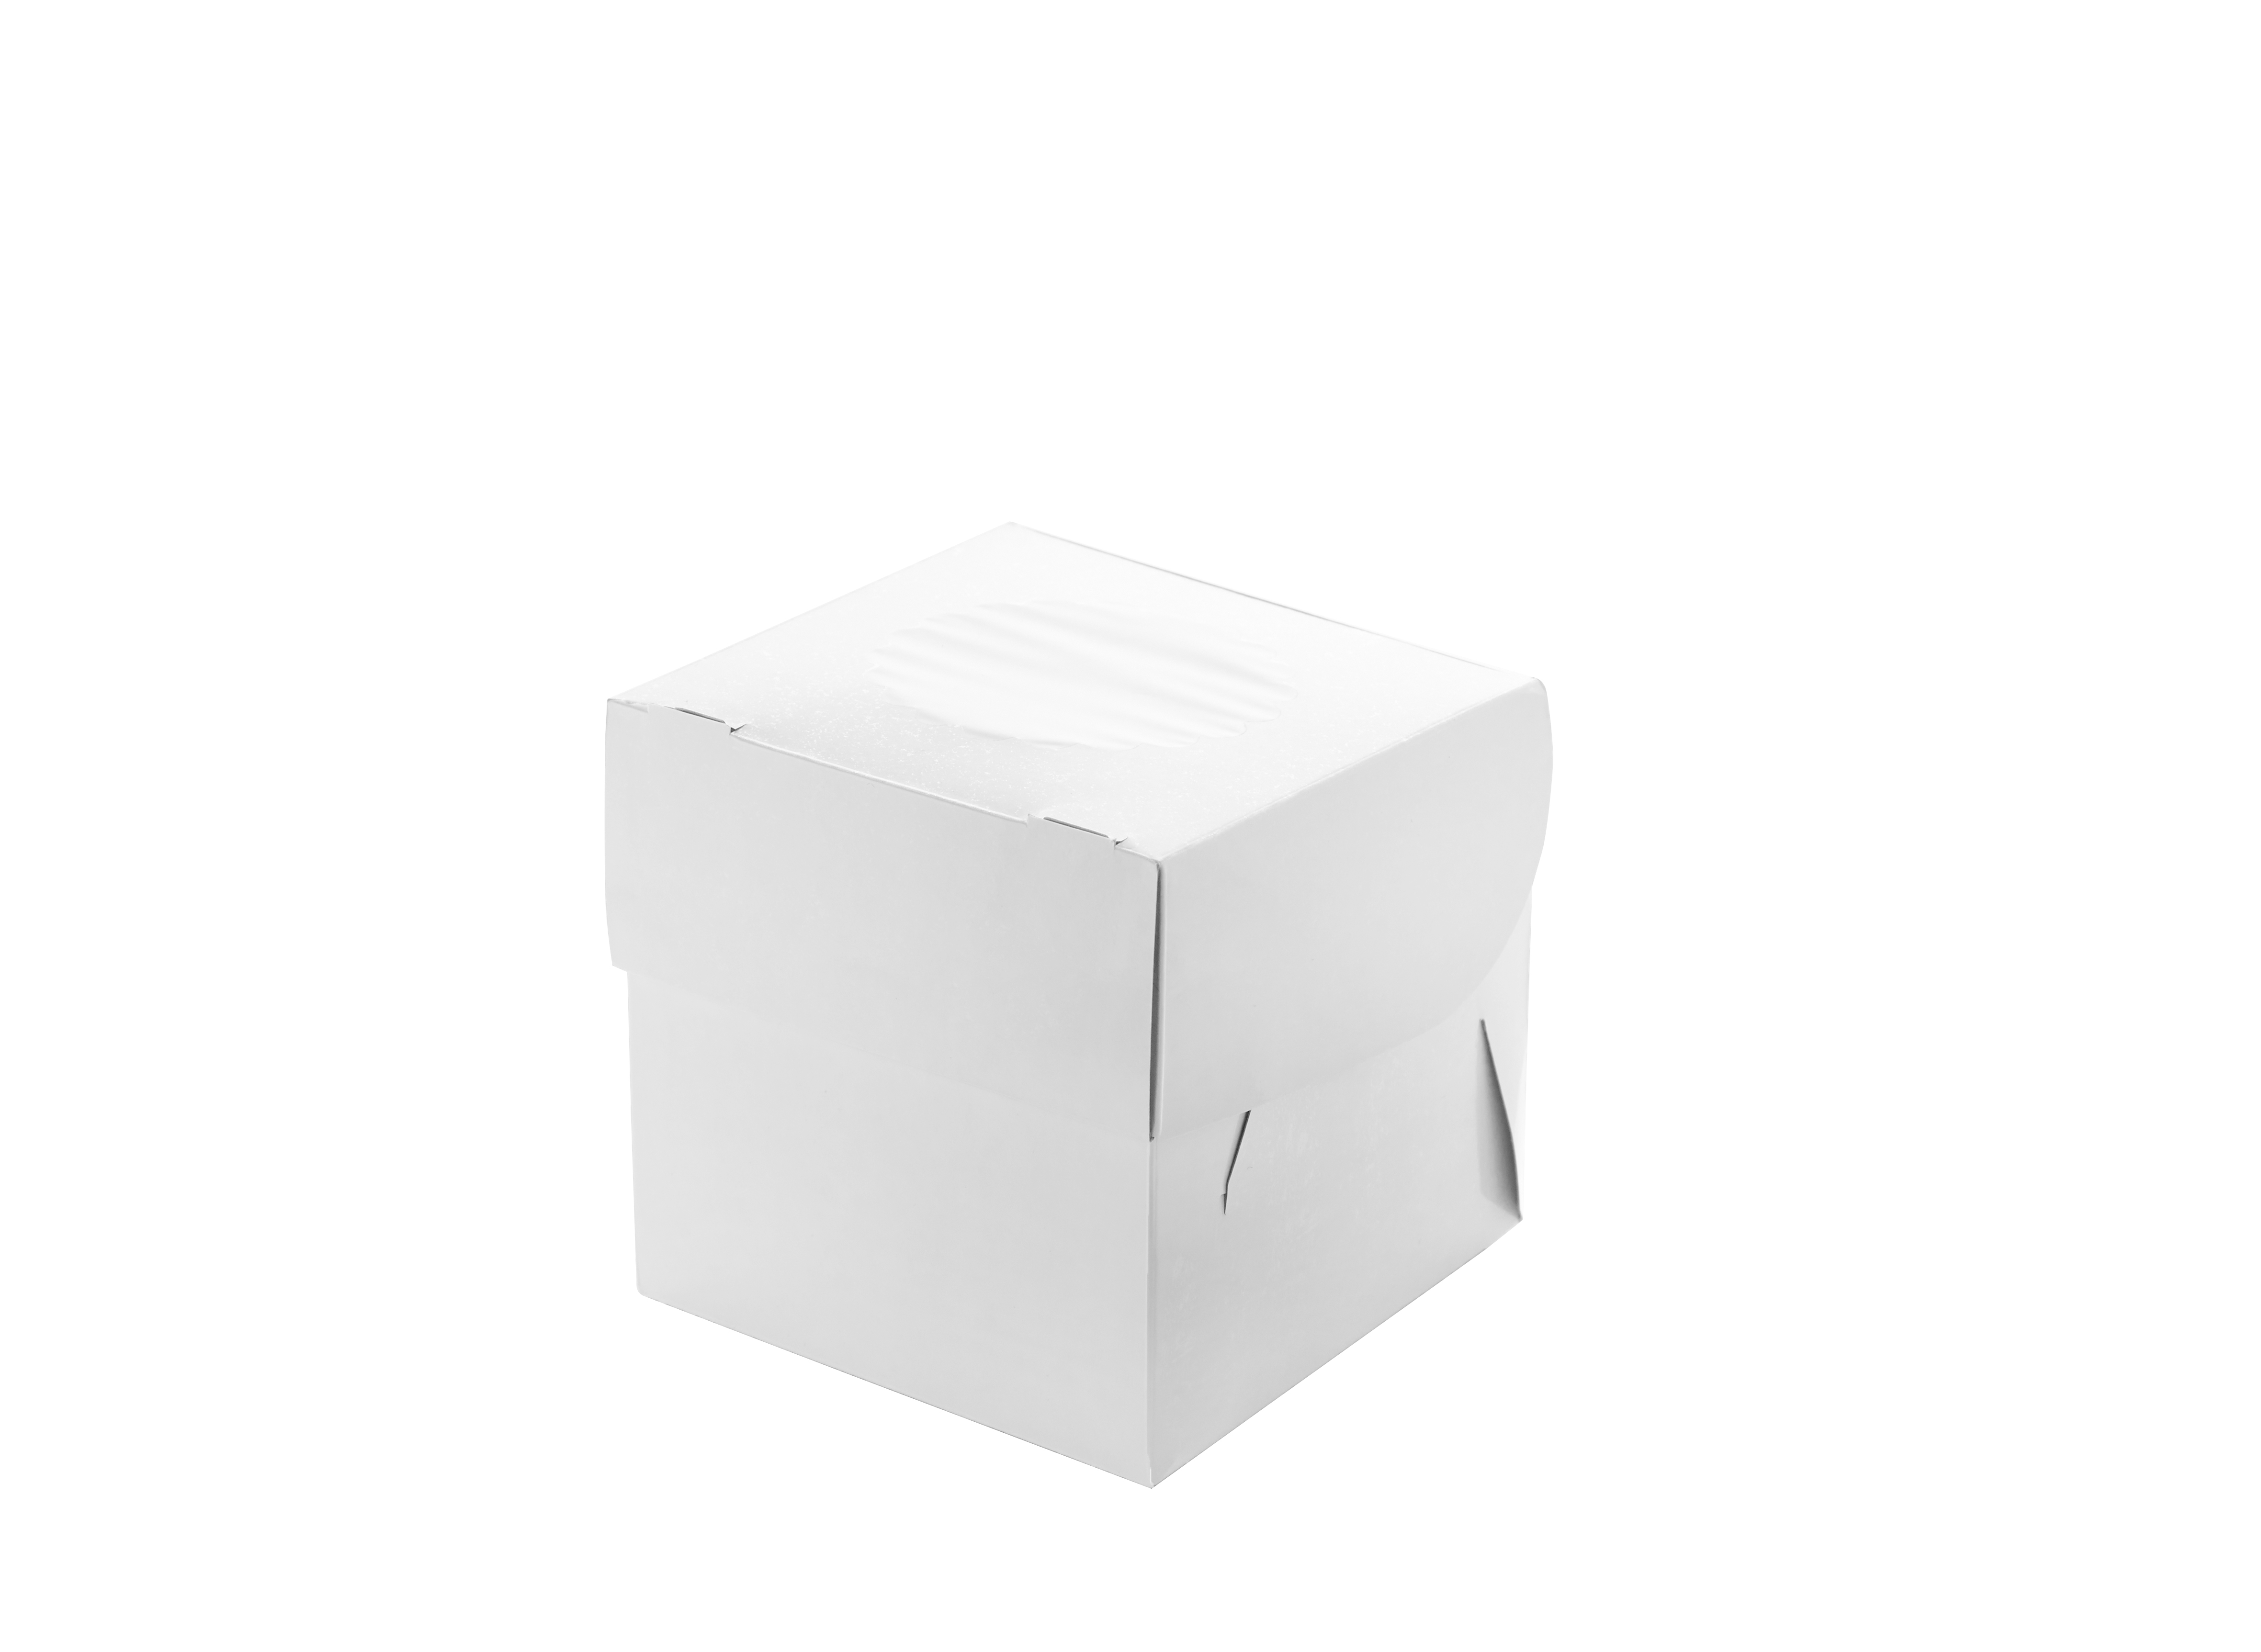 OSQ MUF 3 boxes for muffins